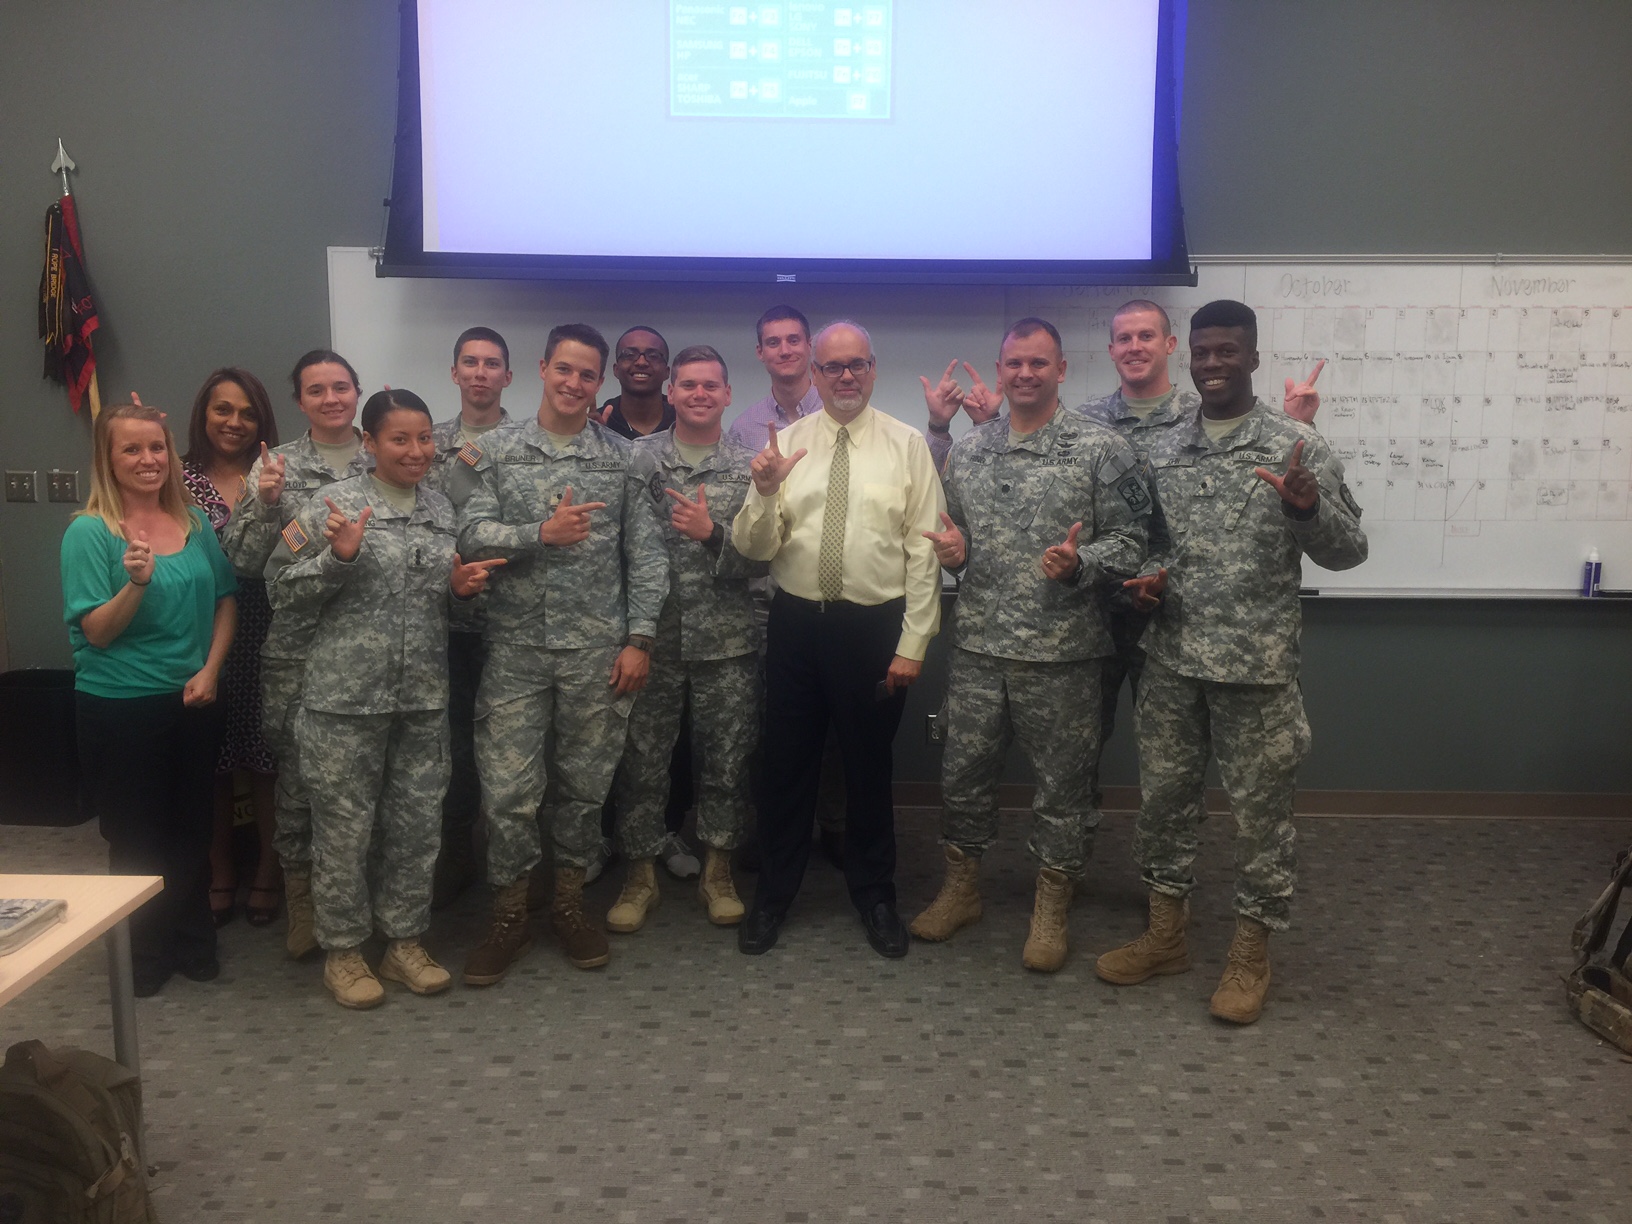 Dean Perlmutter and ROTC getting their Guns Up